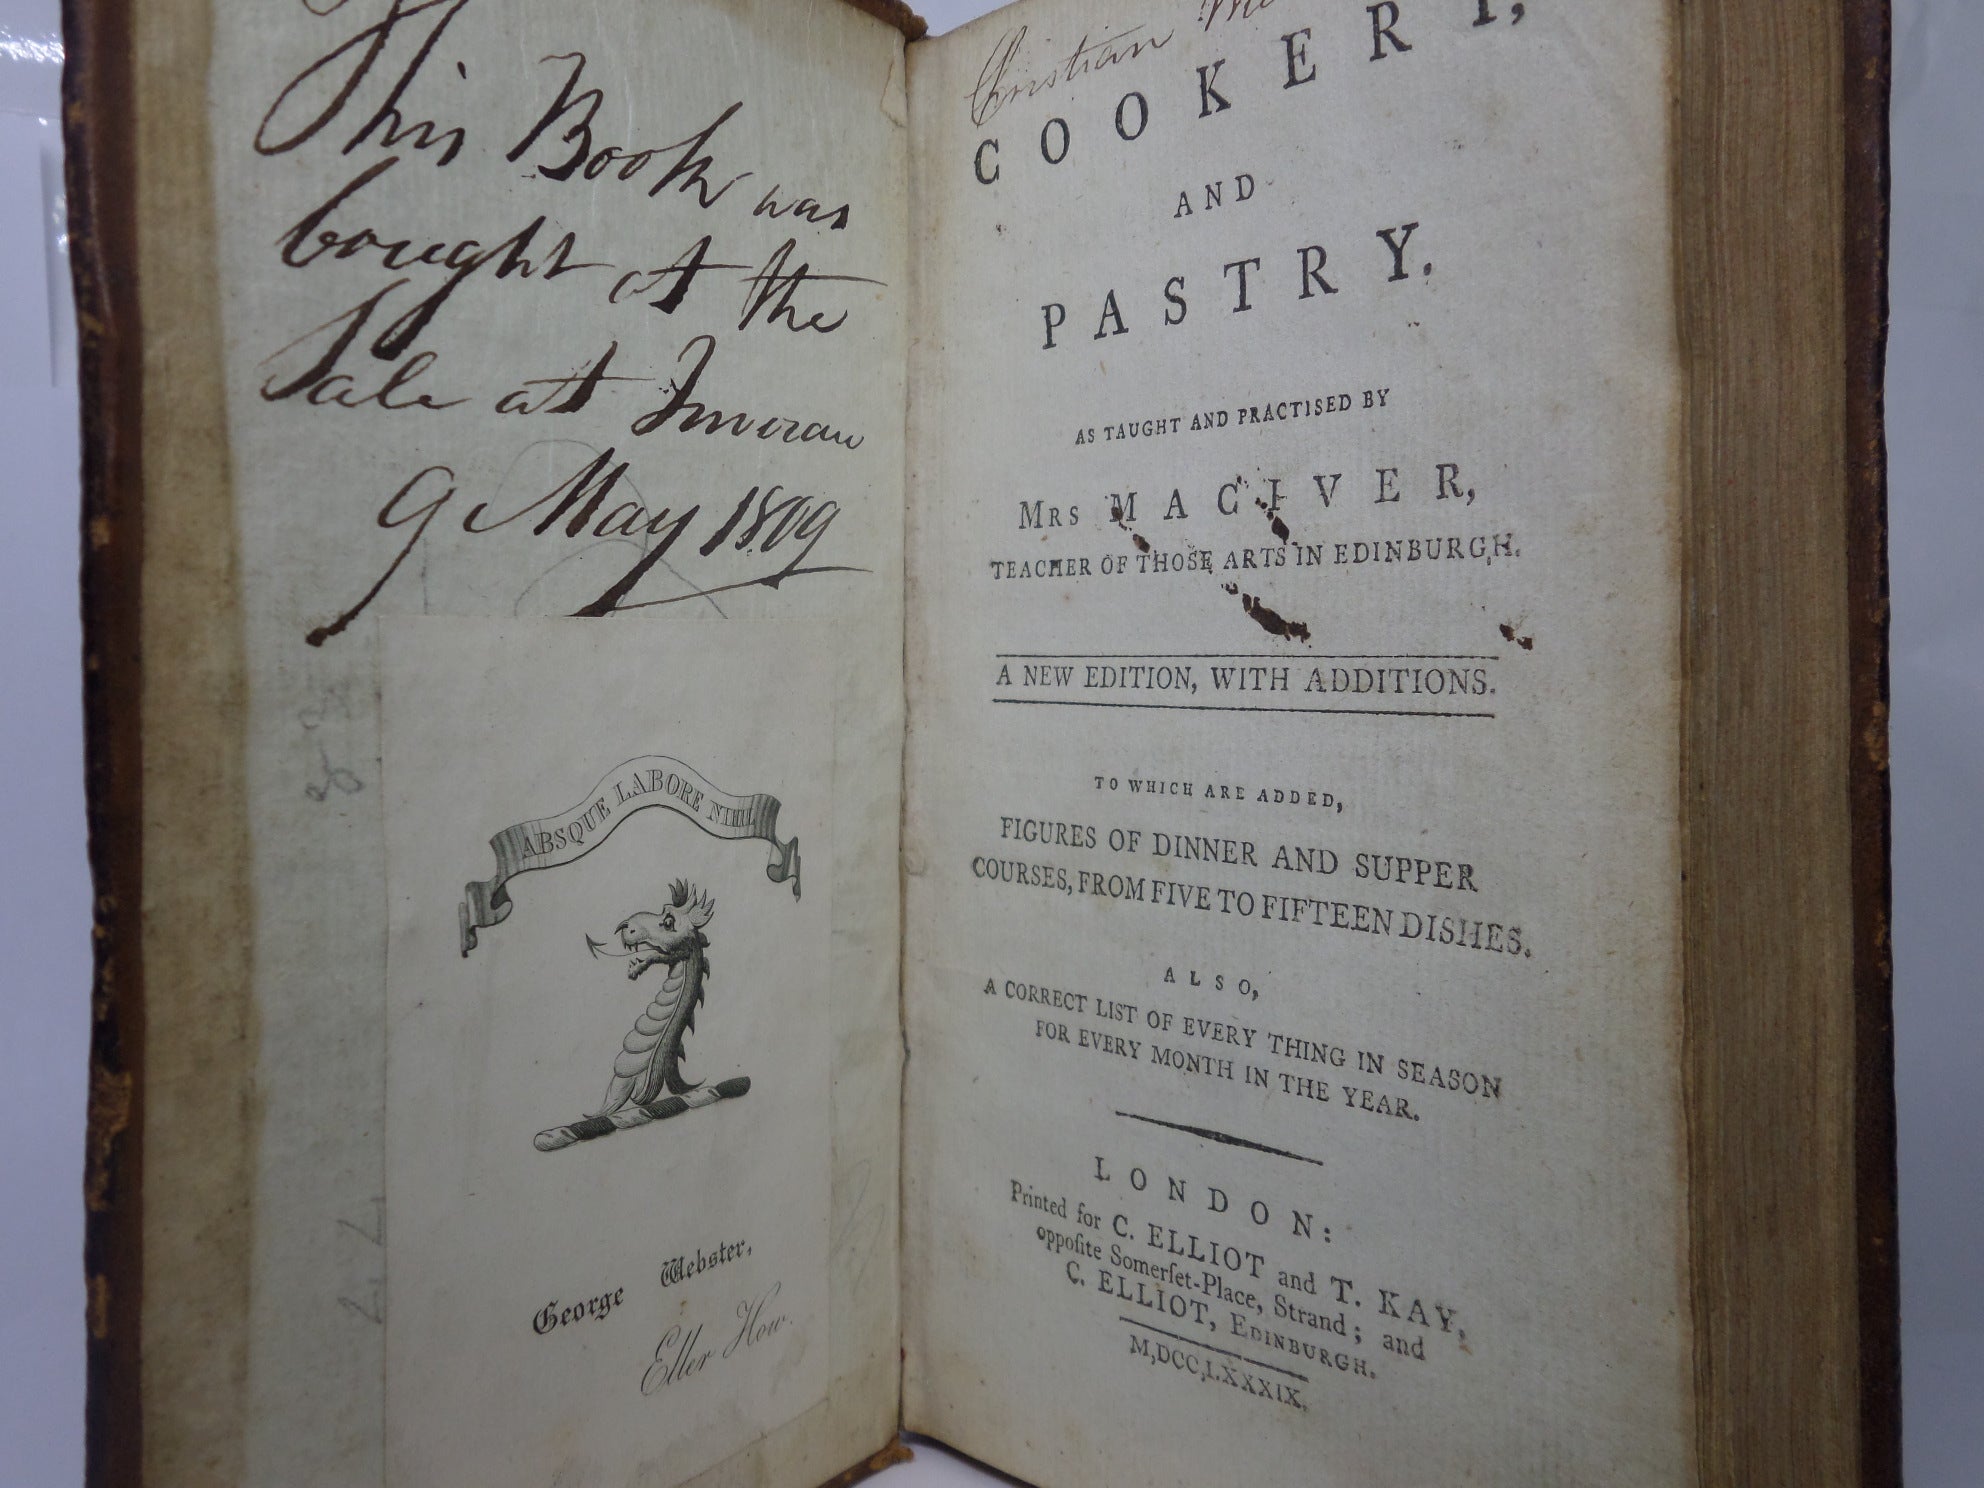 COOKERY AND PASTRY AS TAUGHT AND PRACTISED BY MRS MACIVER 1789 LEATHER BINDING